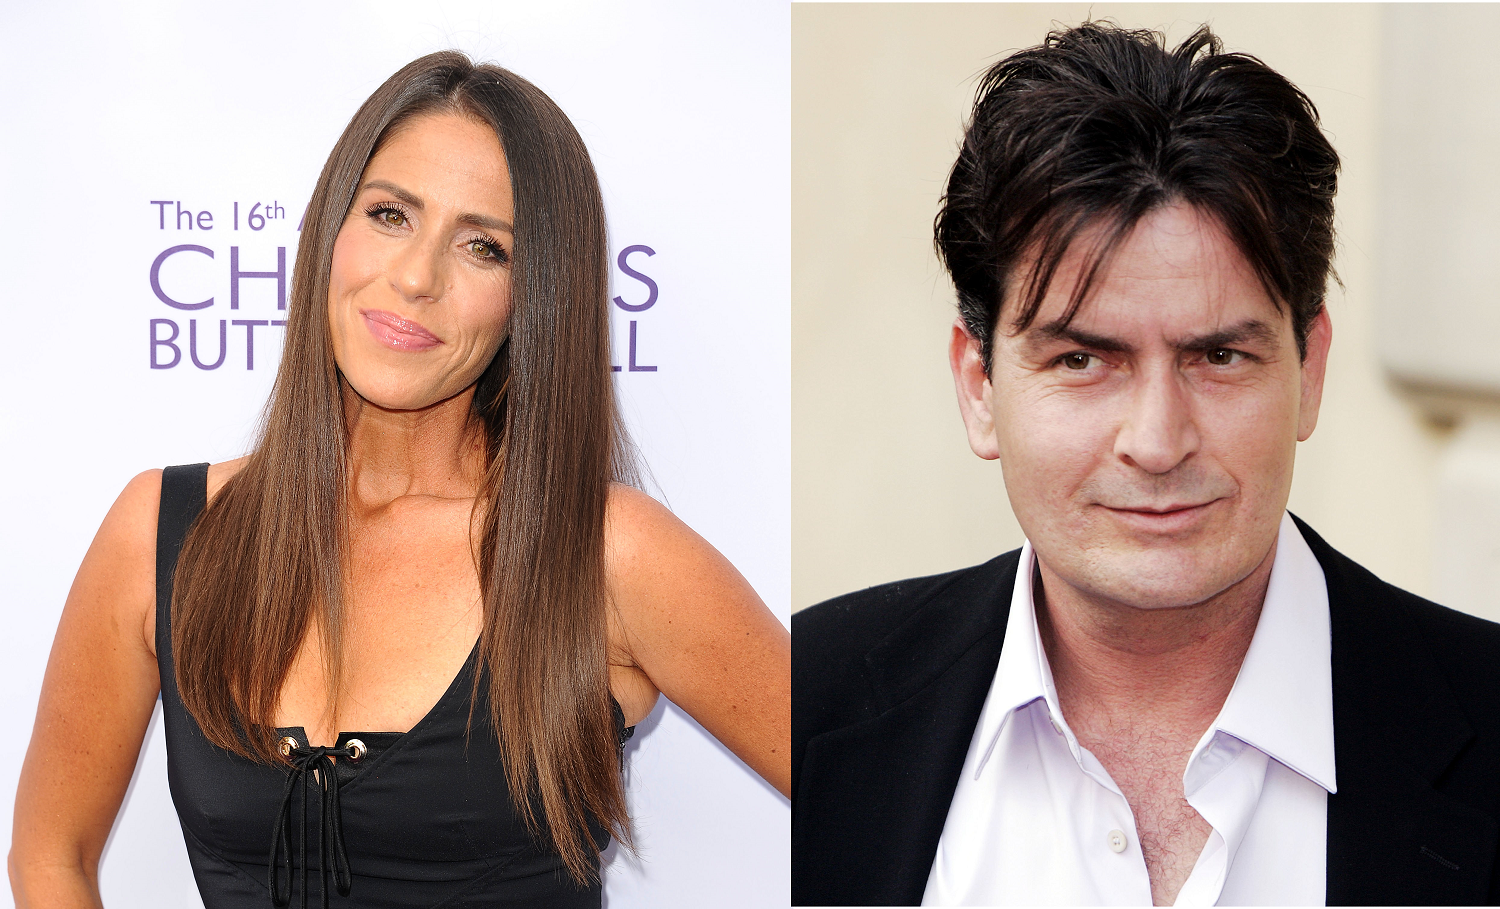 Soleil Moon Frye and Charlie Sheen